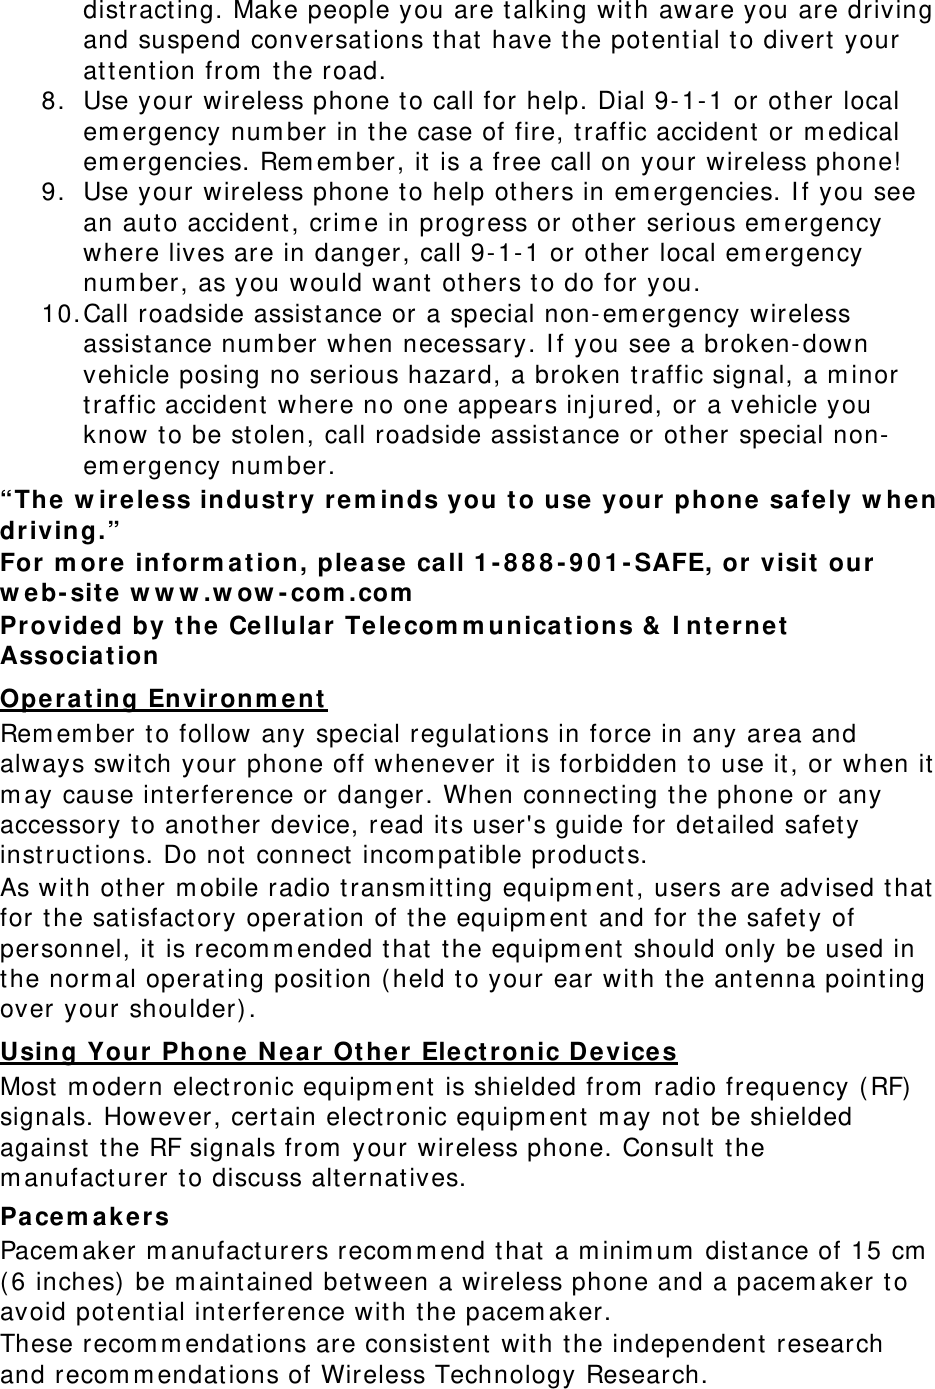 dist ract ing. Make people you are t alking wit h aware you are driving and suspend conversations t hat have t he potent ial t o divert your at t ention from  t he road. 8. Use your wireless phone t o call for help. Dial 9- 1- 1 or ot her local em ergency num ber in the case of fire, t raffic accident  or m edical em ergencies. Rem em ber, it  is a free call on your wireless phone! 9. Use your wireless phone t o help ot hers in em ergencies. I f you see an aut o accident, crim e in progress or other serious em ergency where lives are in danger, call 9- 1- 1 or other local em ergency num ber, as you would want  others t o do for you. 10. Call roadside assist ance or a special non- em ergency wireless assist ance num ber when necessary. I f you see a broken- down vehicle posing no serious hazard, a broken t raffic signal, a m inor traffic accident  where no one appears inj ured, or a vehicle you know t o be stolen, call roadside assist ance or other special non-em ergency num ber. “The w ir eless industry r em inds you to use  your  phone sa fely w hen driving.” For m ore inform a t ion, ple ase call 1 - 8 8 8 - 9 0 1 - SAFE, or  visit  our w eb- sit e  w w w .w ow - com .com  Provided by the Cellular  Te lecom m unica t ions &amp;  I nt e rnet  Associa t ion  Opera t ing Environm ent Rem em ber to follow any special regulat ions in force in any area and always switch your phone off whenever it is forbidden to use it, or when it m ay cause int erference or danger. When connect ing t he phone or any accessory to another device, read its user&apos;s guide for detailed safet y instructions. Do not  connect  incom patible product s. As wit h other m obile radio t ransm it ting equipm ent , users are advised t hat for t he satisfact ory operation of t he equipm ent  and for t he safety of personnel, it is recom m ended that t he equipm ent  should only be used in the norm al operating position ( held to your ear wit h the ant enna point ing over your shoulder). Using Your Phone  N ear  Ot her Elect ronic De vice s Most  m odern elect ronic equipm ent  is shielded from  radio frequency ( RF) signals. However, certain elect ronic equipm ent  m ay not  be shielded against the RF signals from  your wireless phone. Consult the m anufact urer t o discuss alt ernat ives. Pacem a ke rs Pacem aker m anufact urers recom m end t hat  a m inim um  dist ance of 15 cm  ( 6 inches)  be m aintained bet ween a wireless phone and a pacem aker t o avoid potent ial int erference with t he pacem aker. These recom m endat ions are consist ent with t he independent  research and recom m endat ions of Wireless Technology Research. 